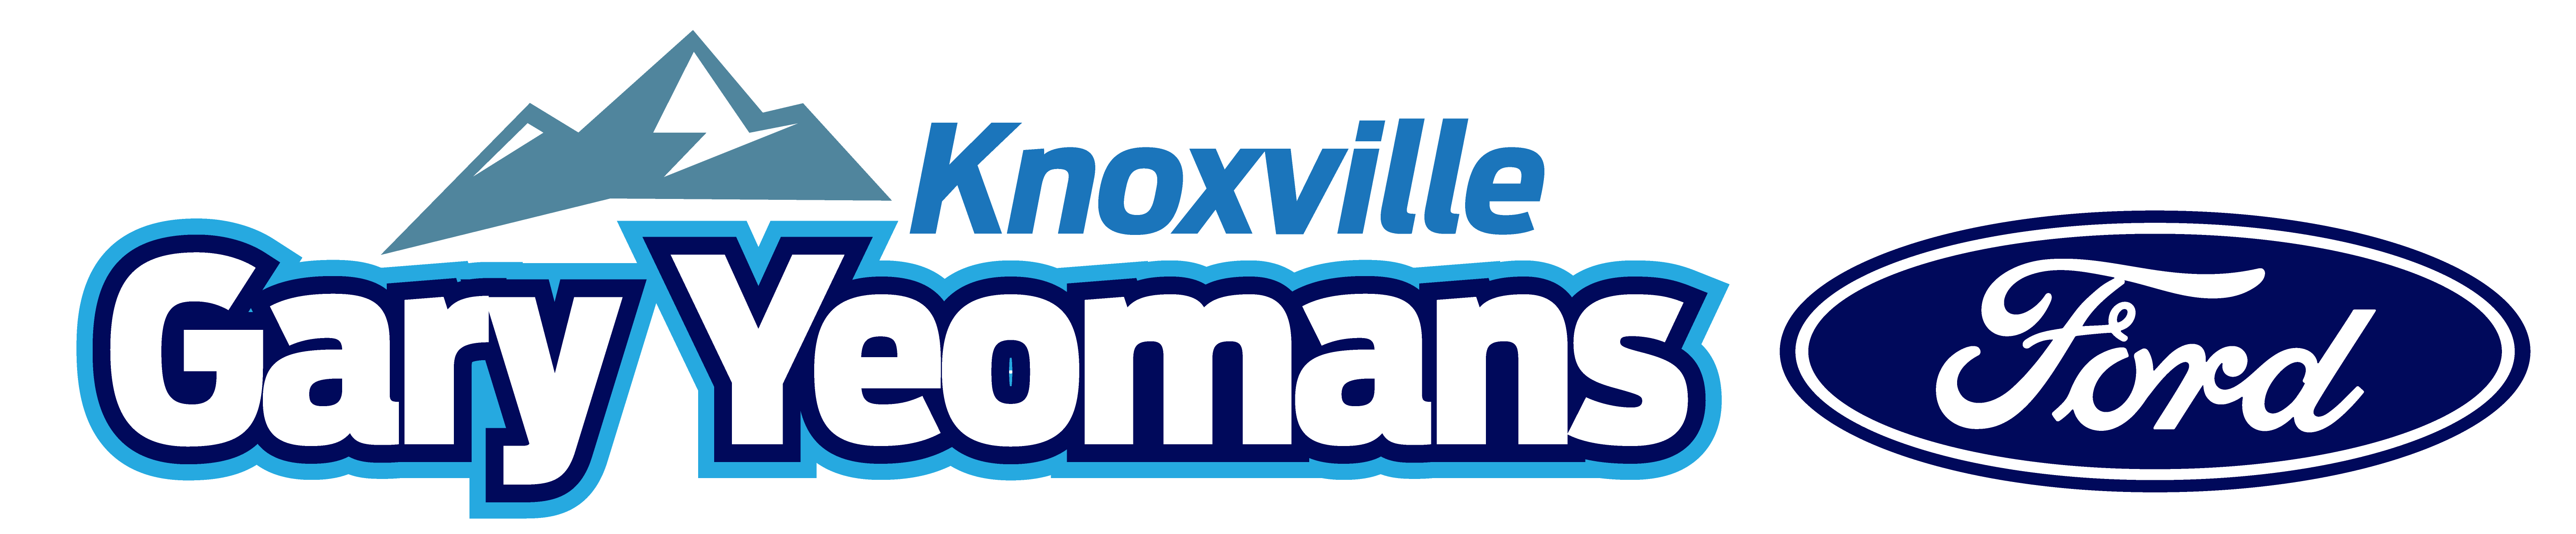 Gary Yeomans Ford Knoxville Knoxville, TN